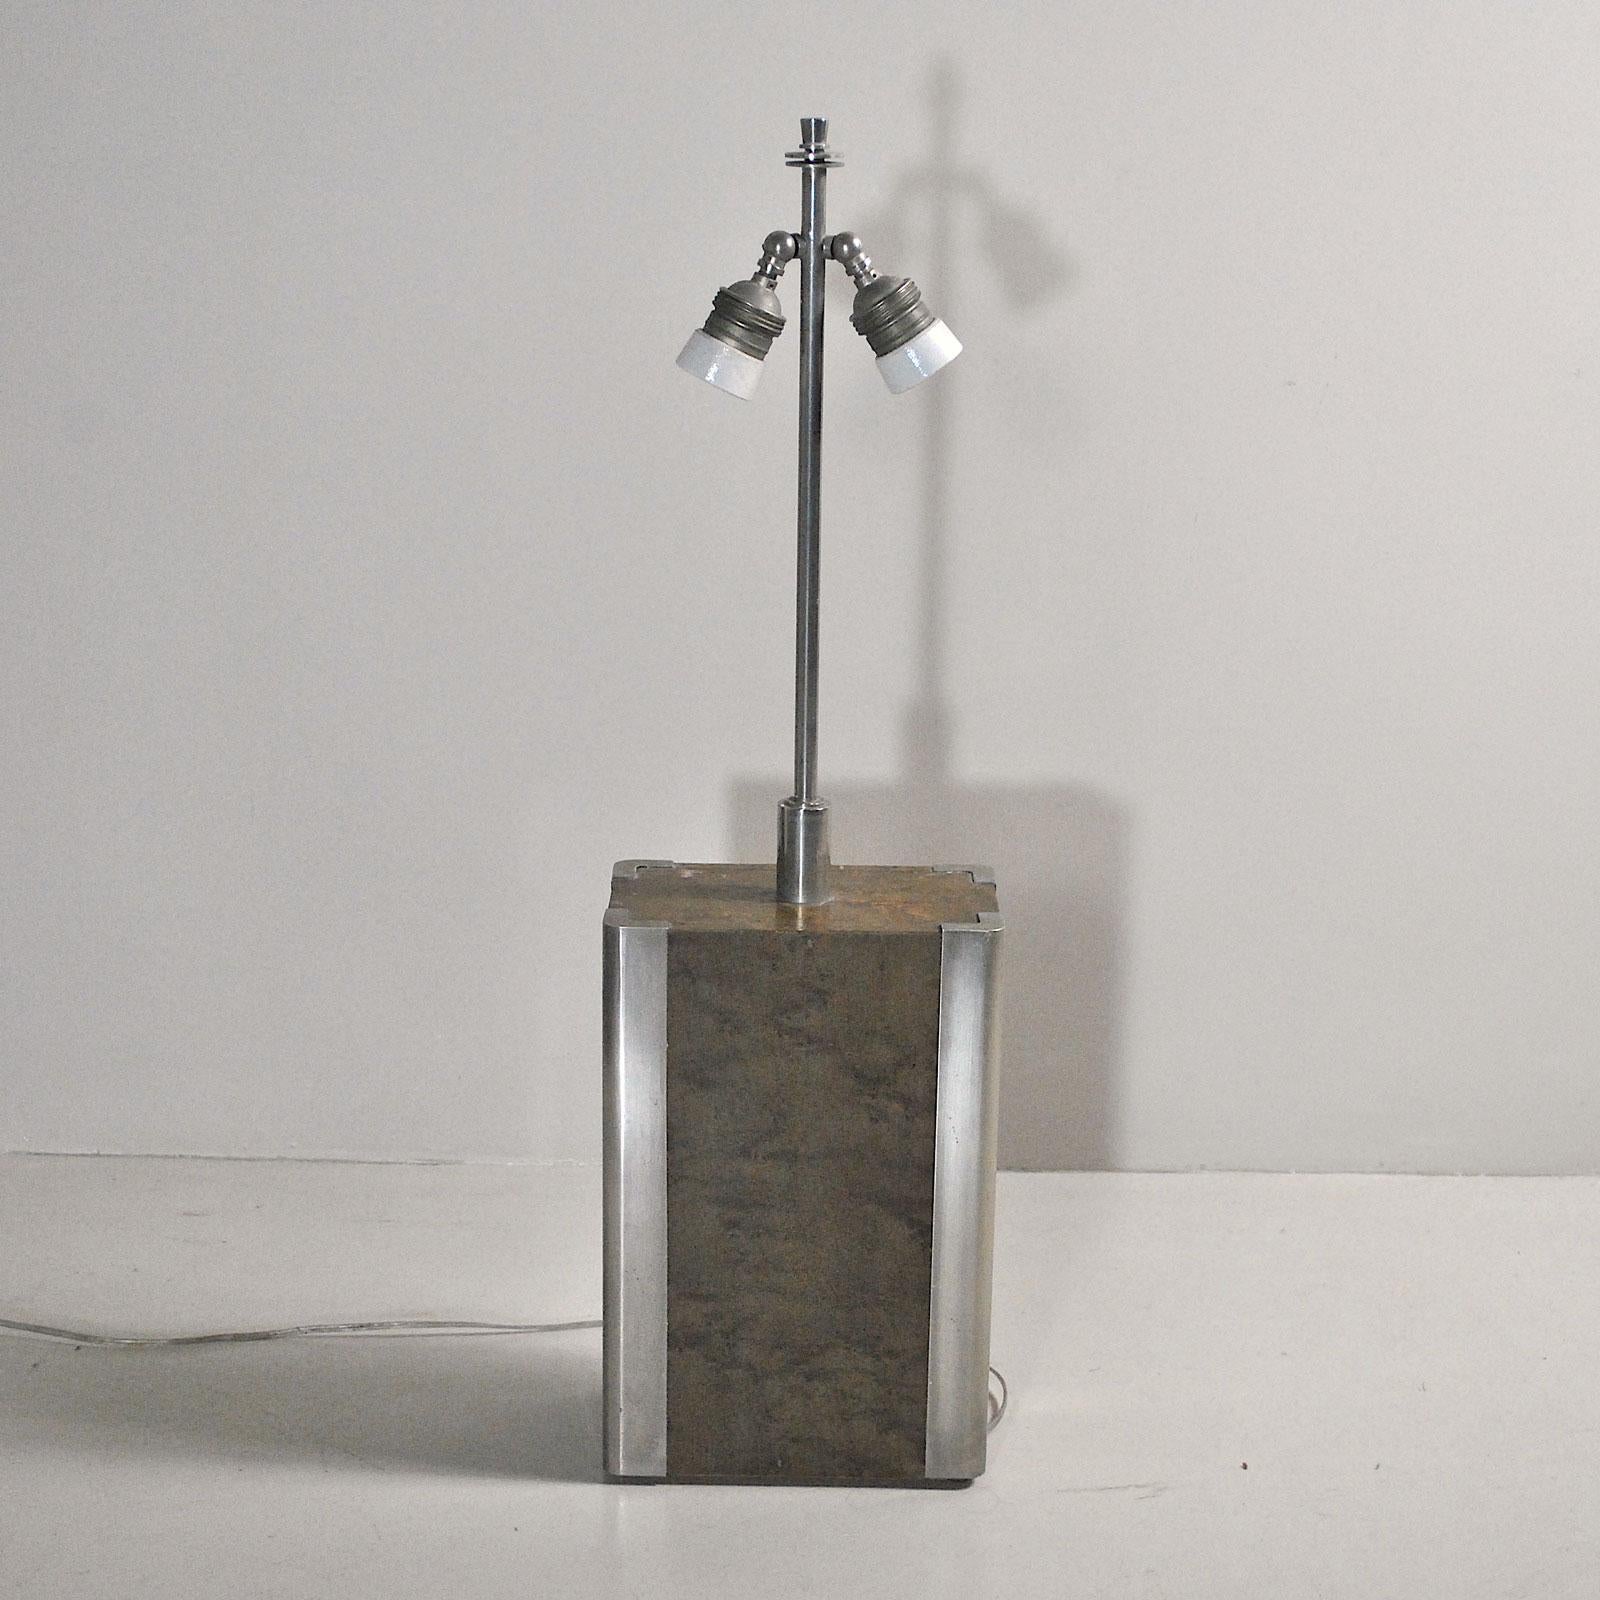 Italian Midcentury Table Lamp in Drawn Wood and Steel from the 1970s For Sale 4